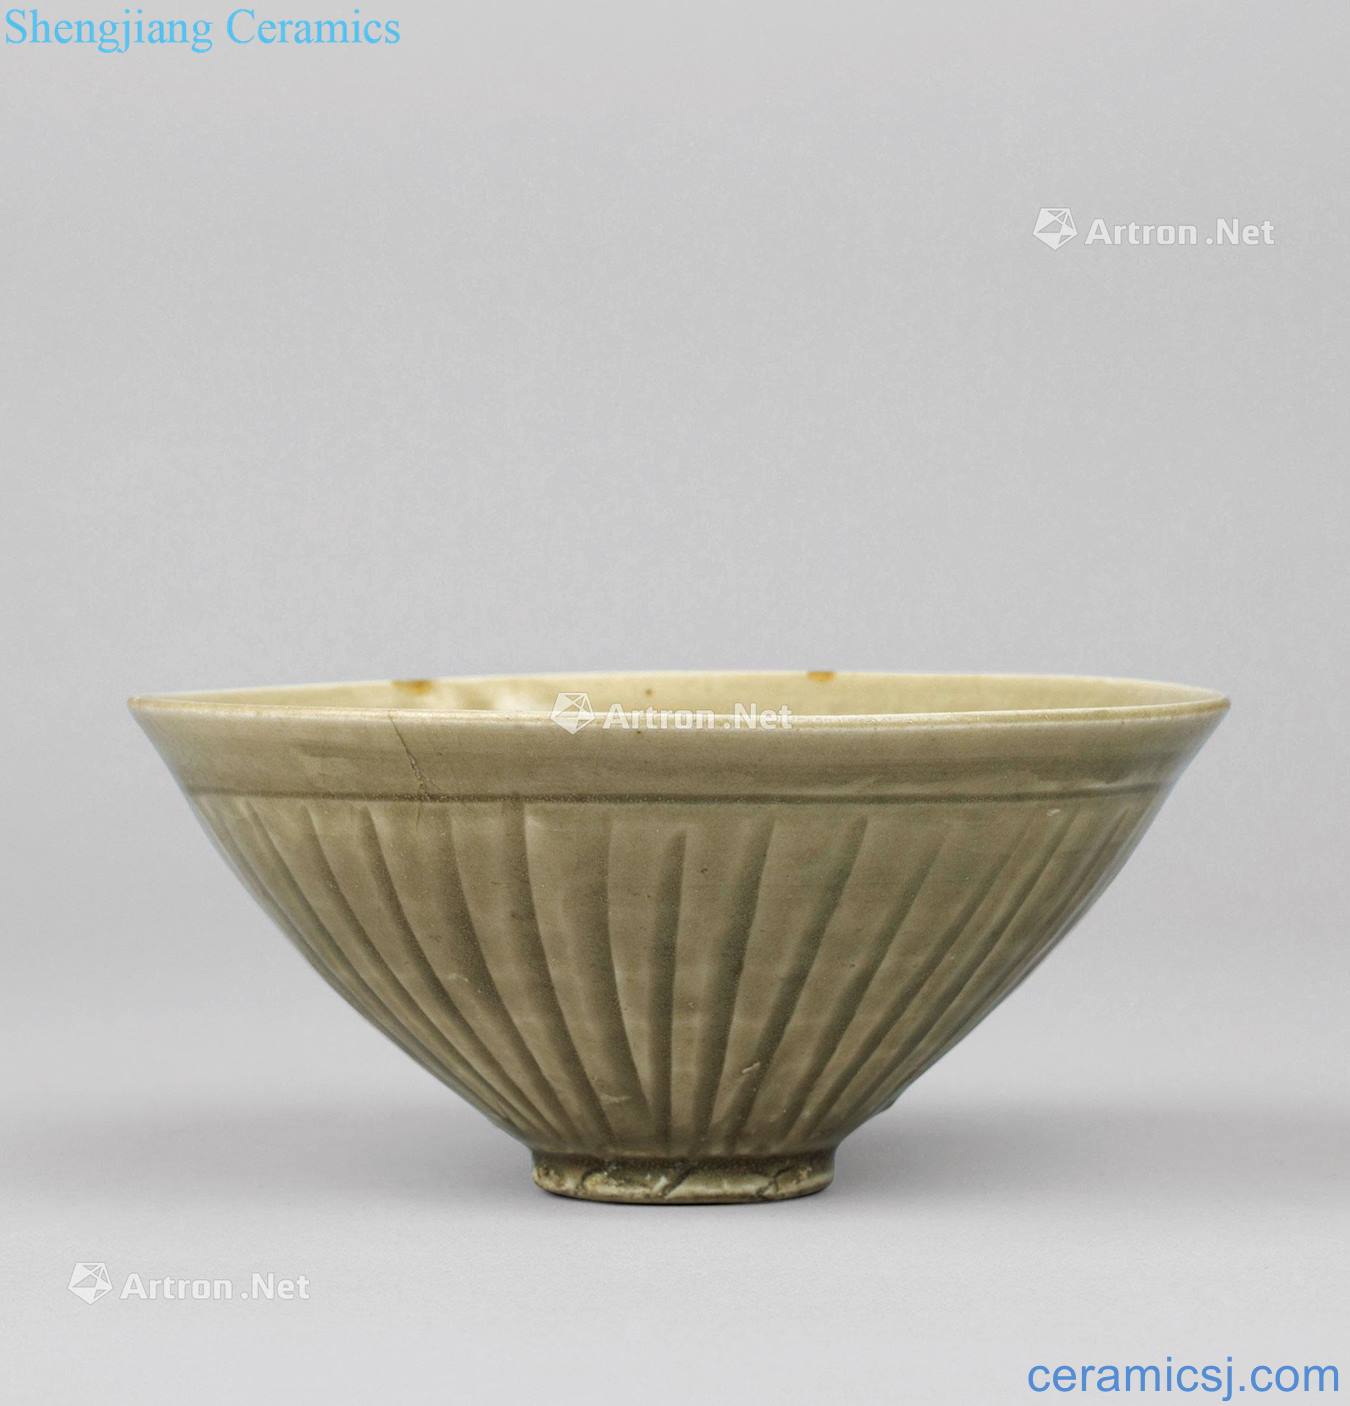 The song dynasty Yao state kiln flowers green-splashed bowls